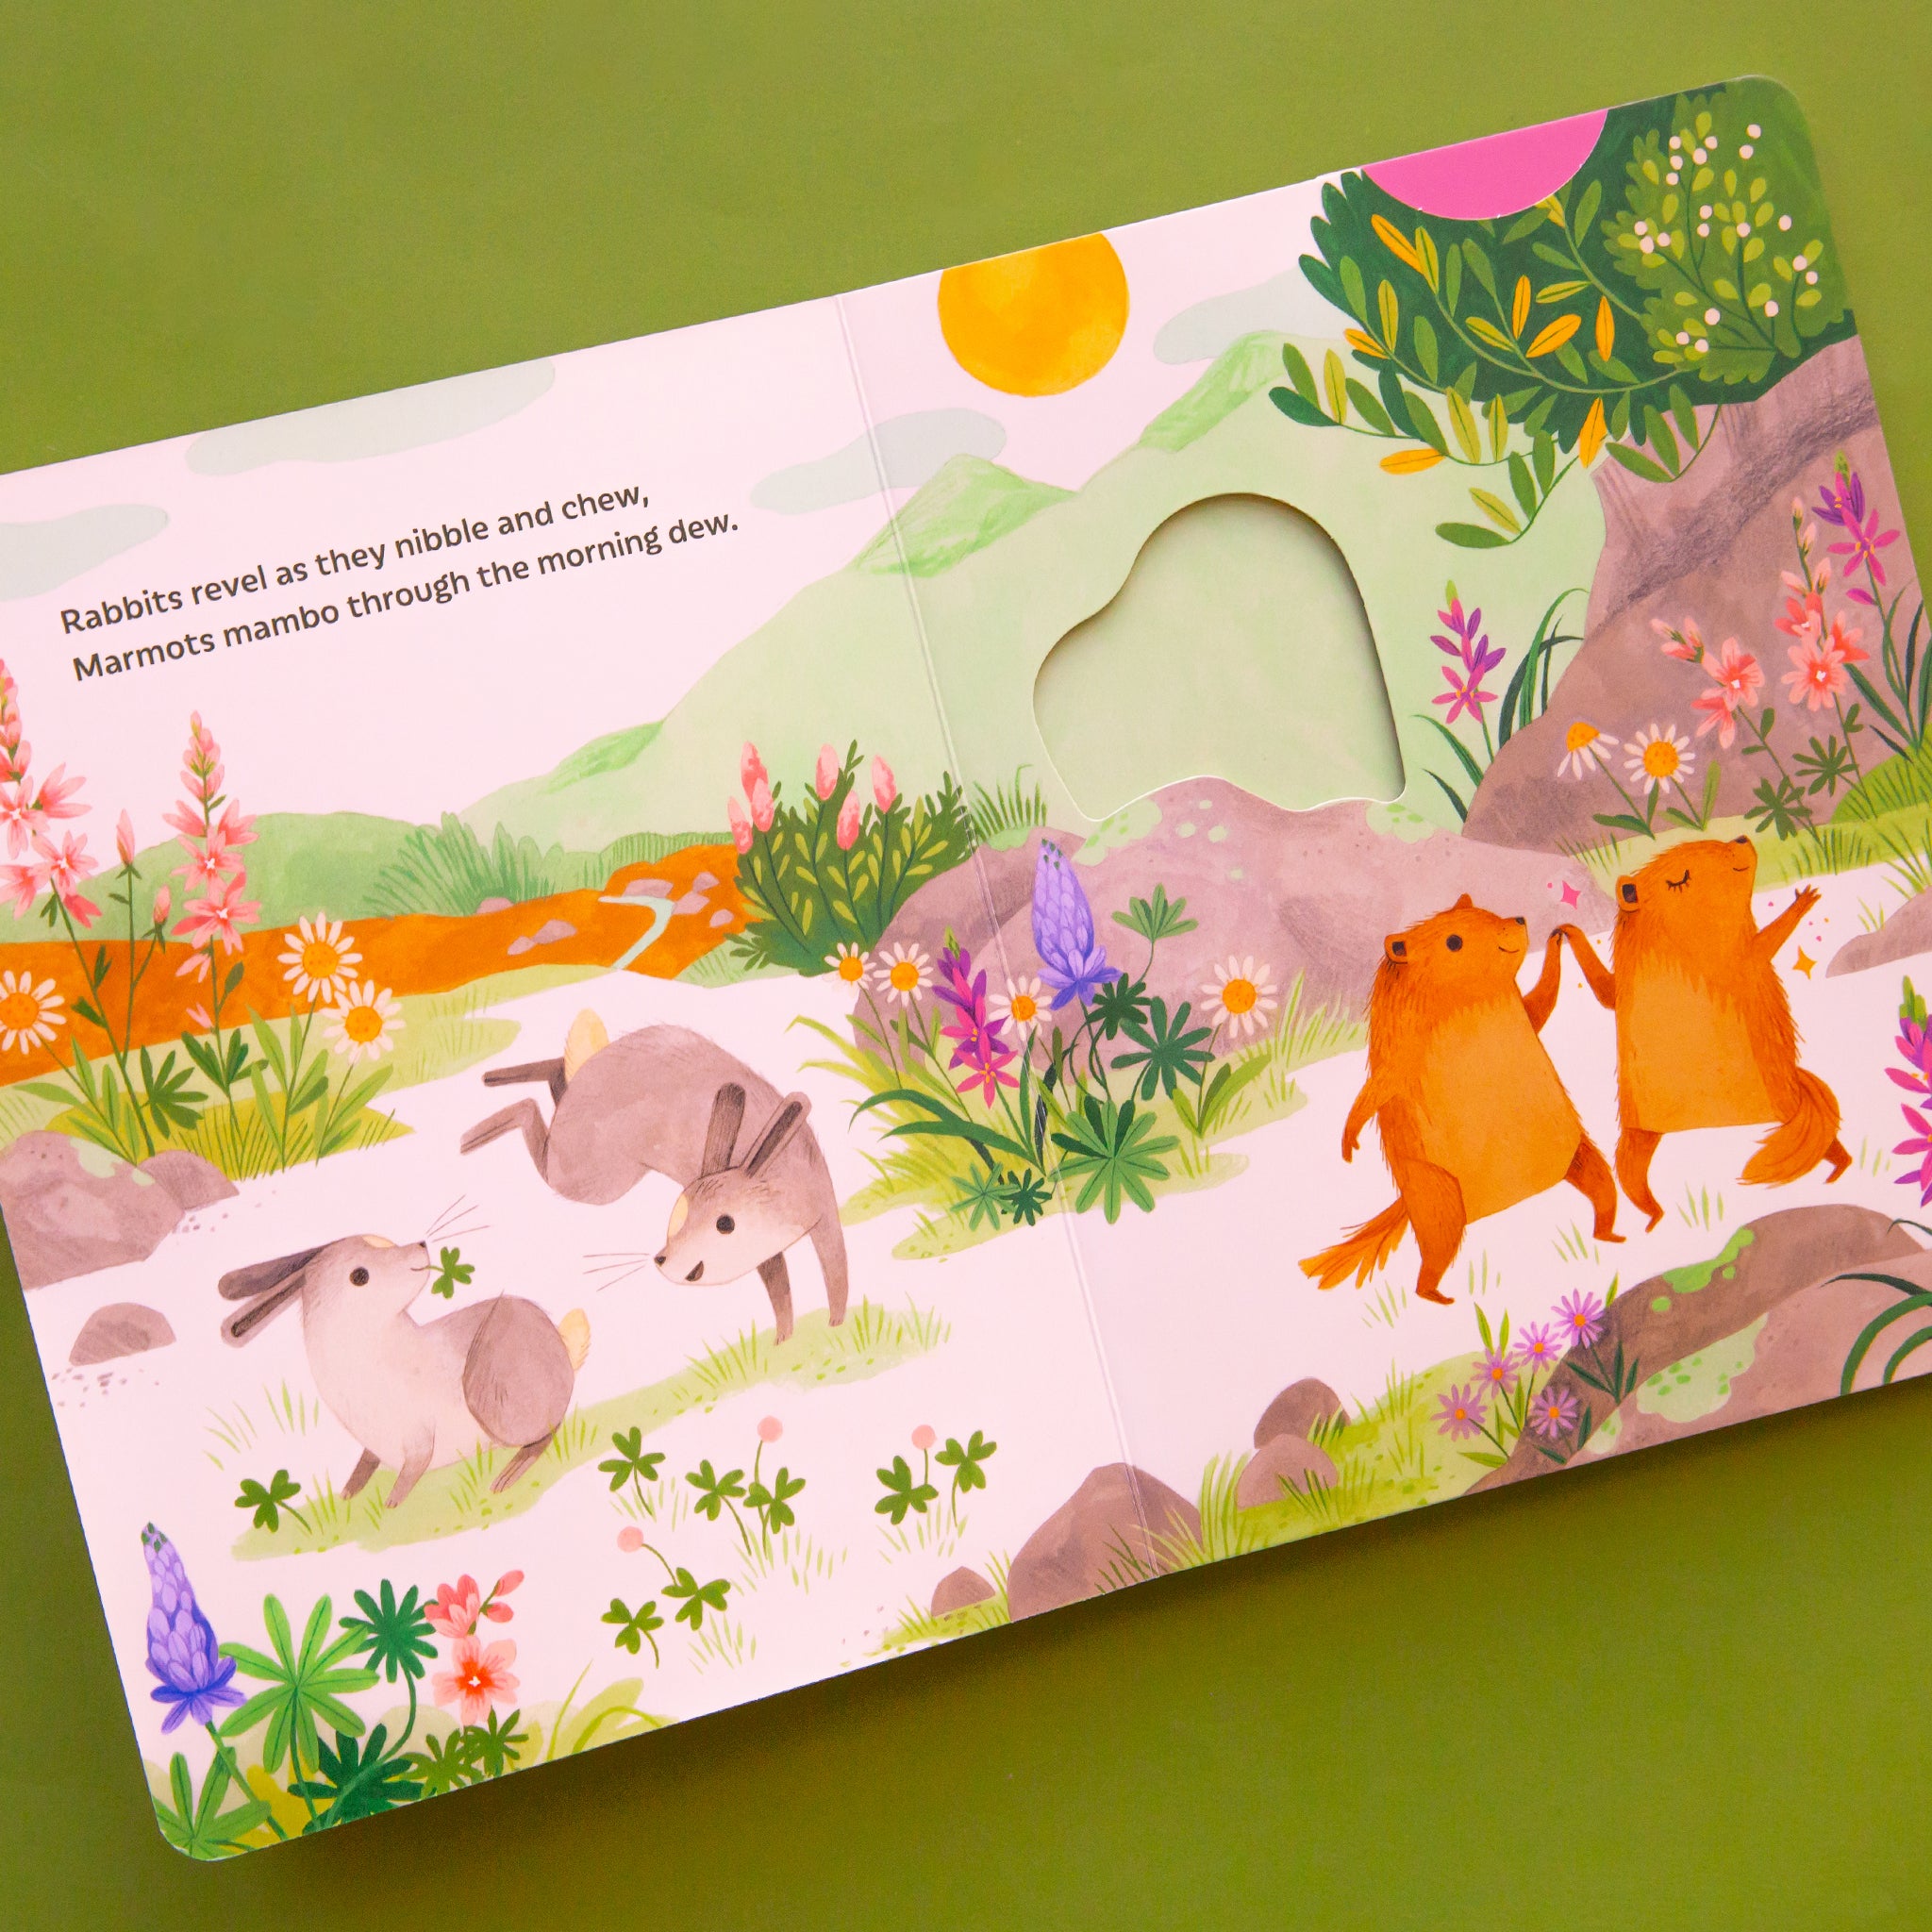 A page opened to the book that shows vibrant illustrations of forest animals and florals along with text. 